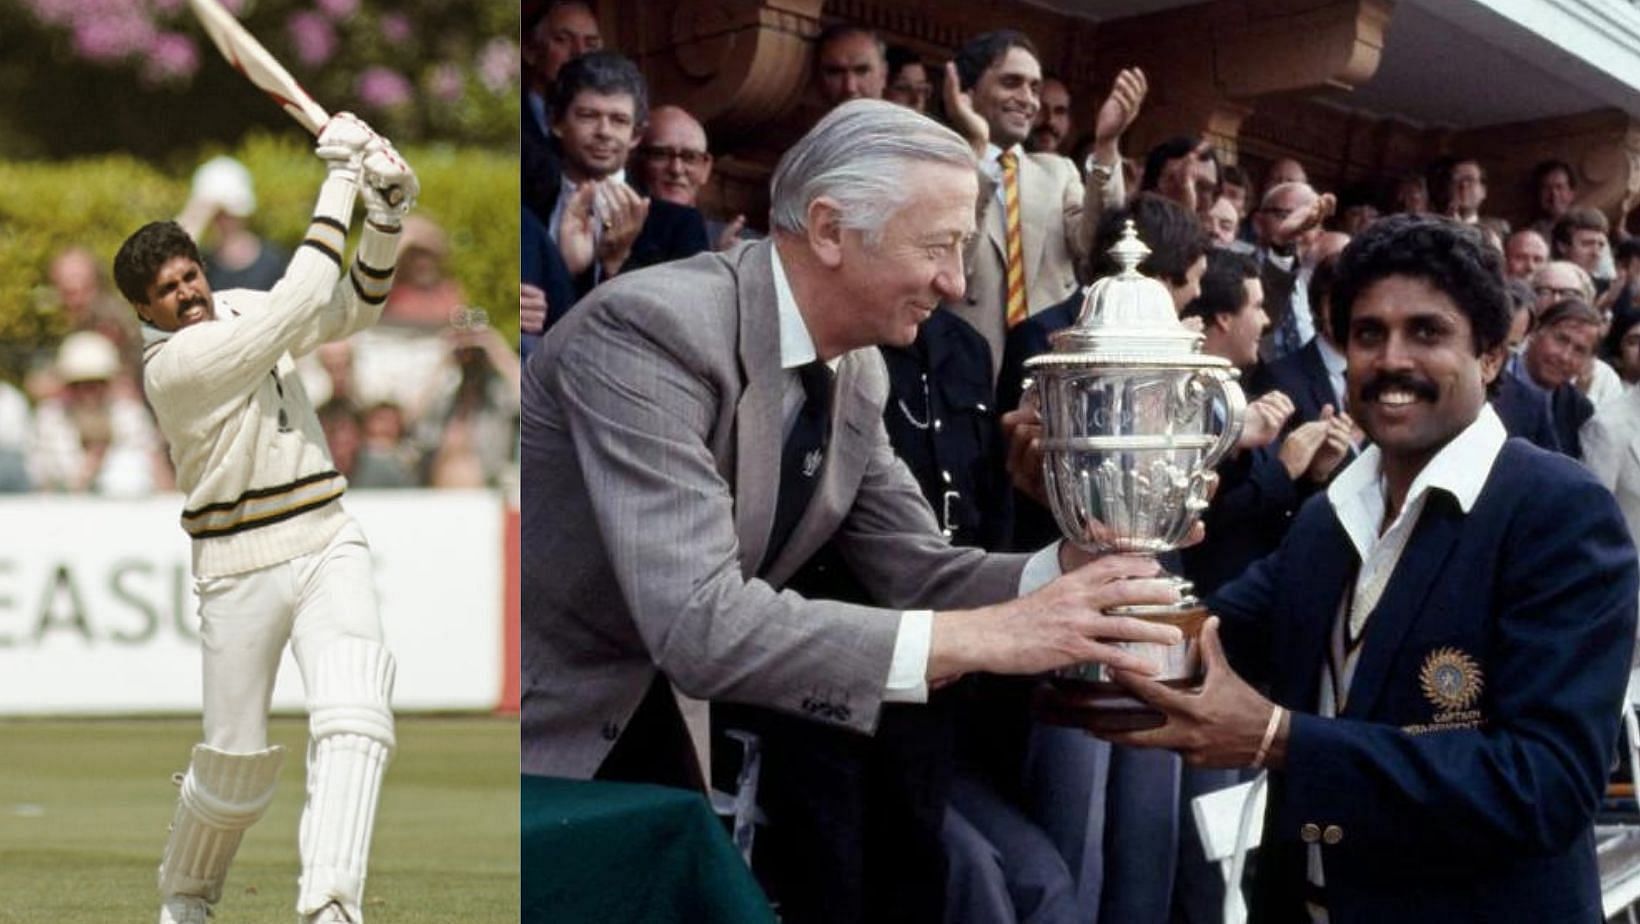 India went on to win the World Cup in 1983.